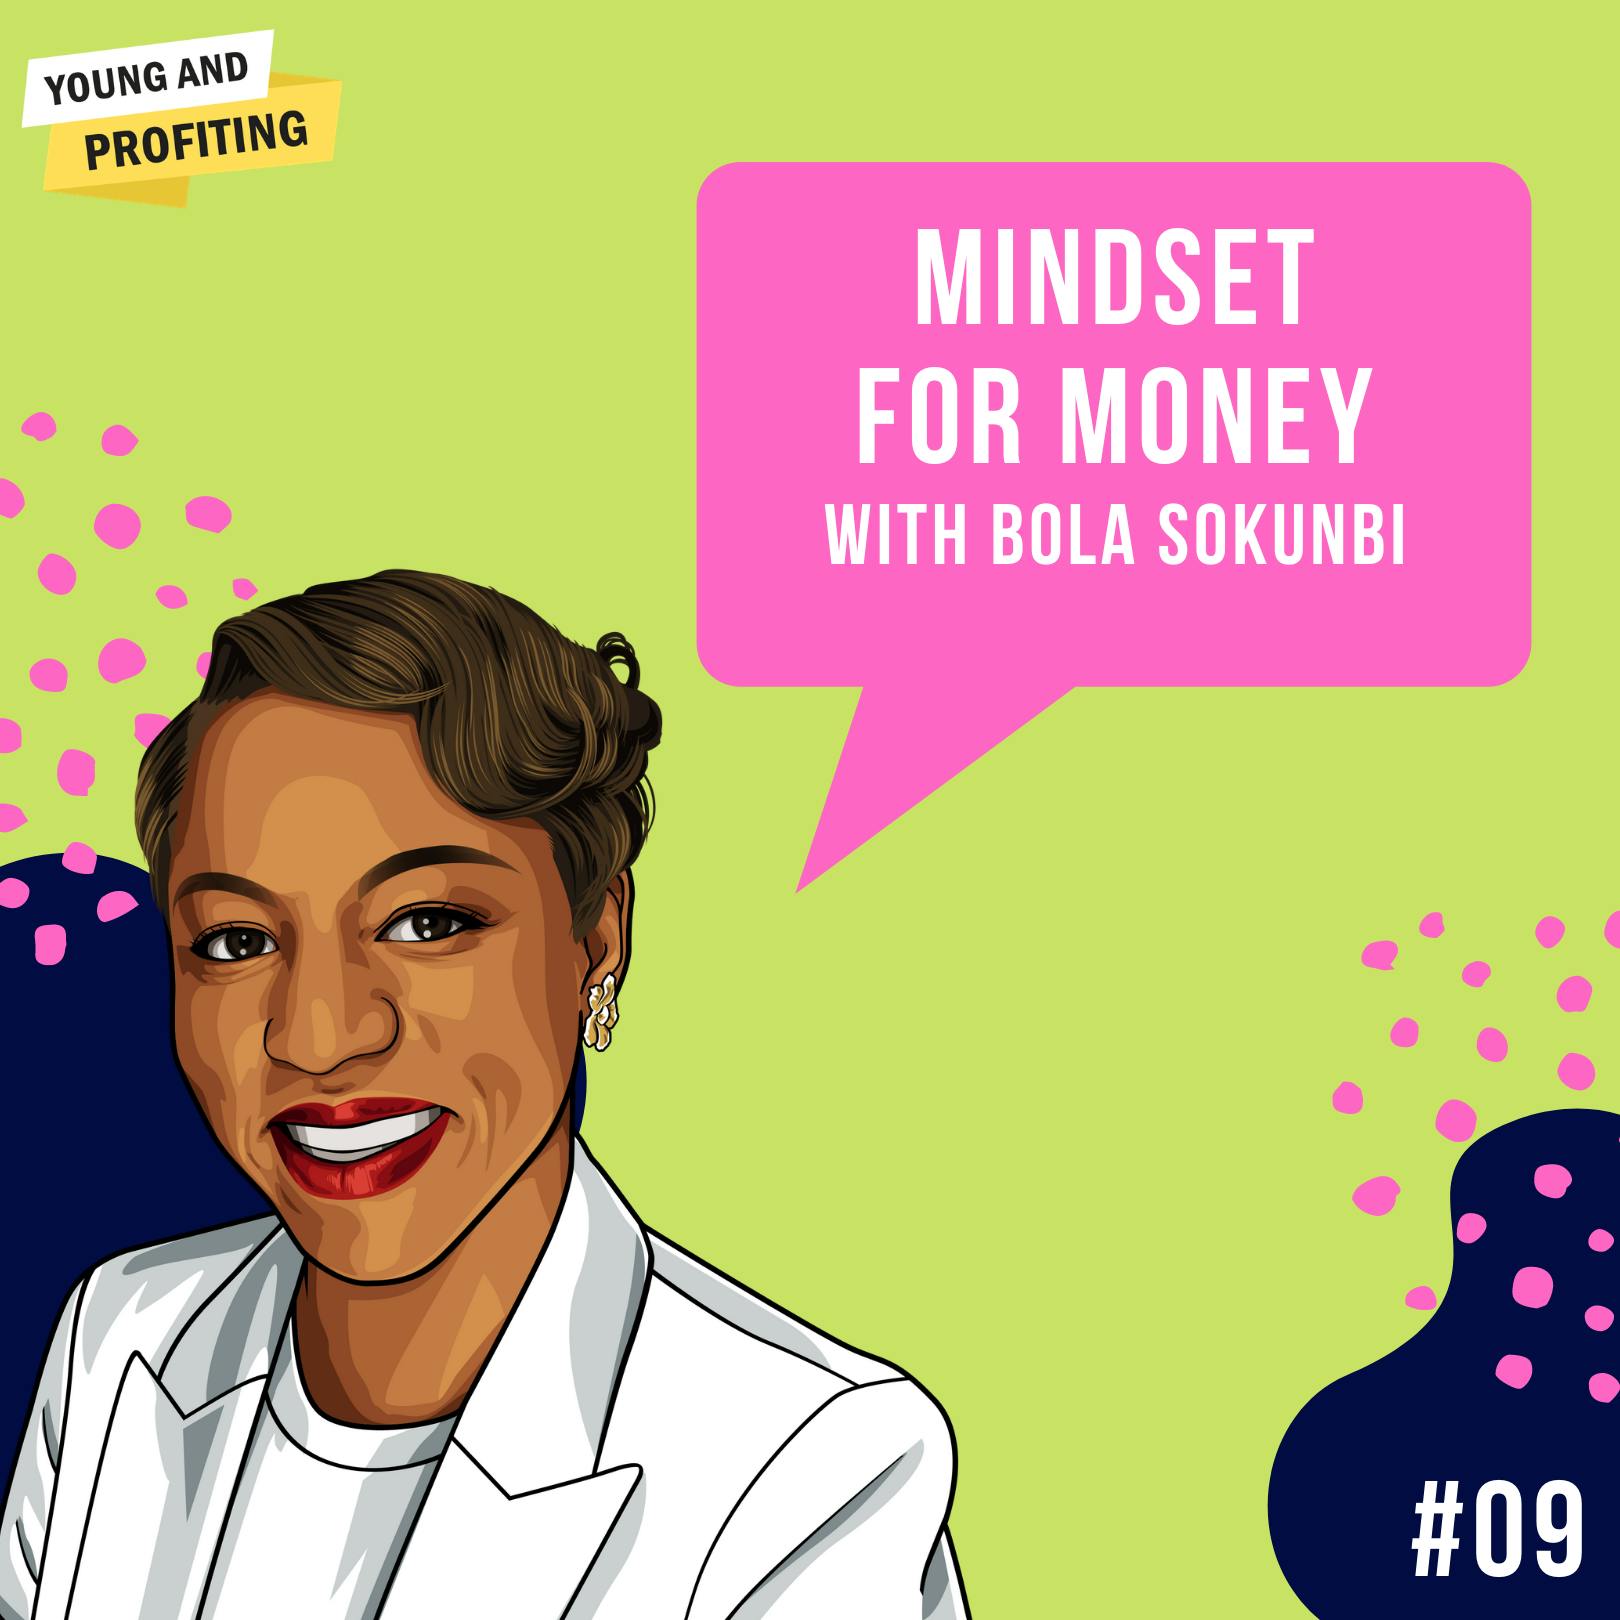 Bola Sokunbi: Getting in the Right Mindset to Attract Money | E9 by Hala Taha | YAP Media Network